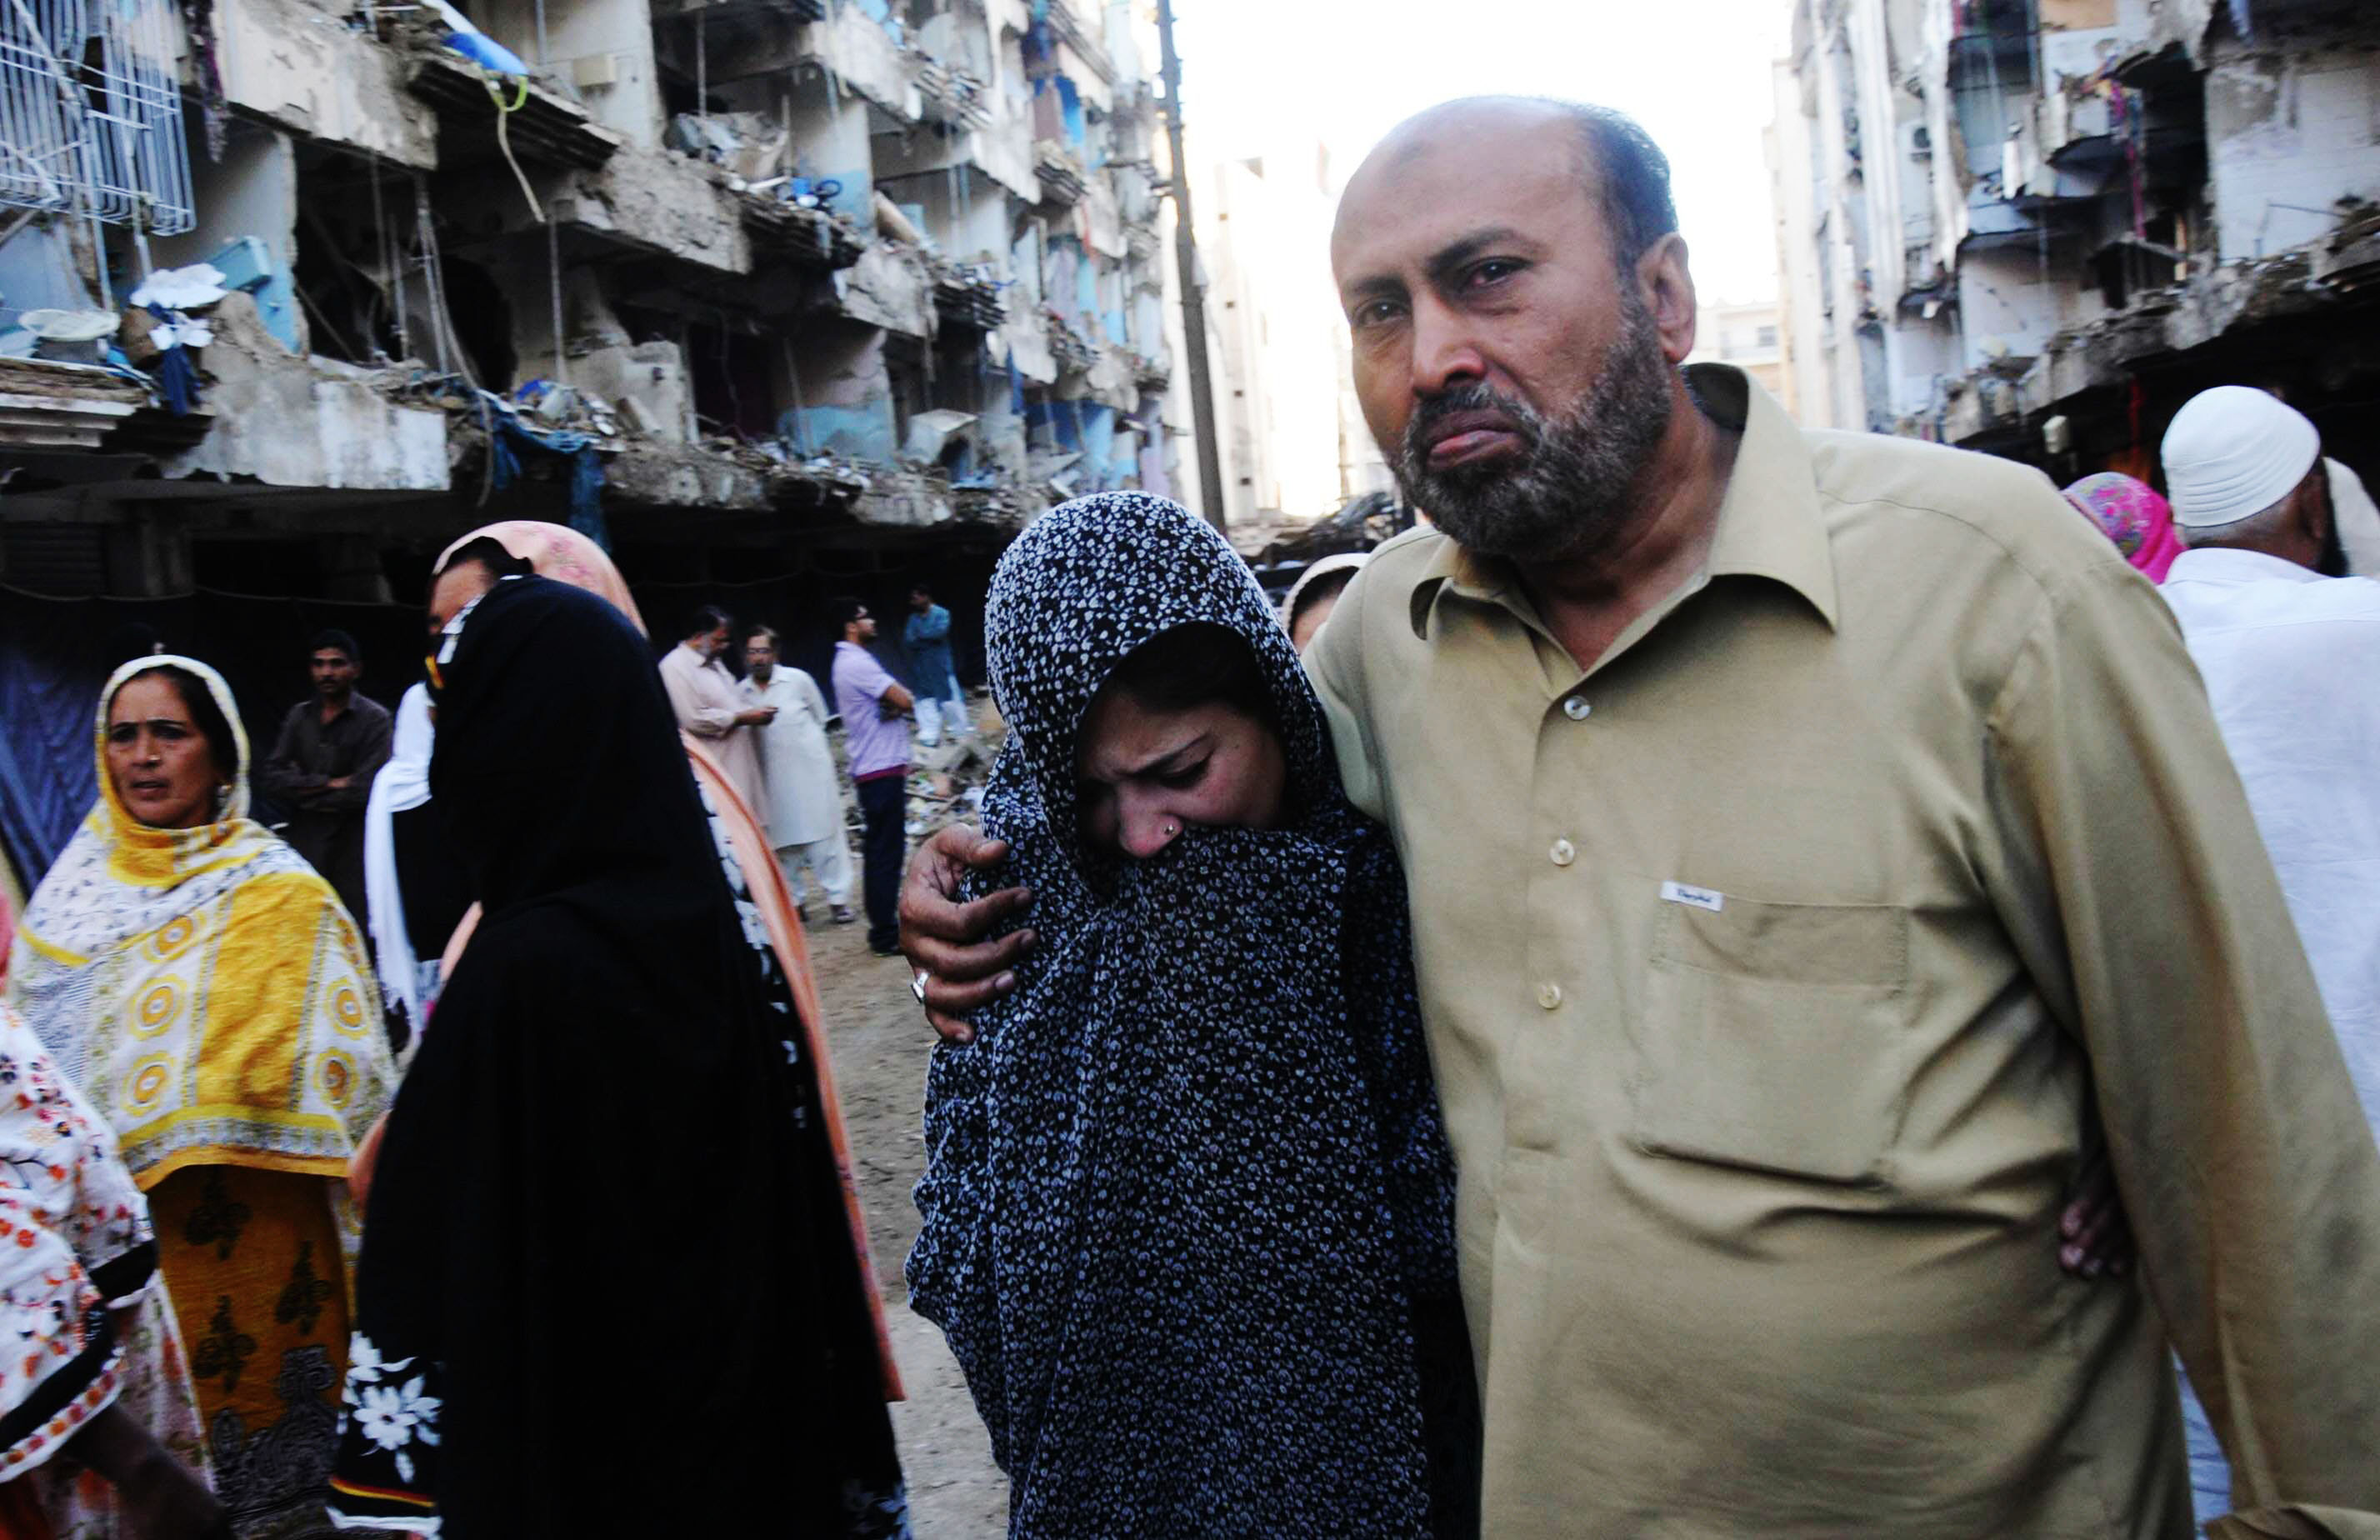 a woman is consoled after the abbas town twin blasts photo rashid ajmeri express file